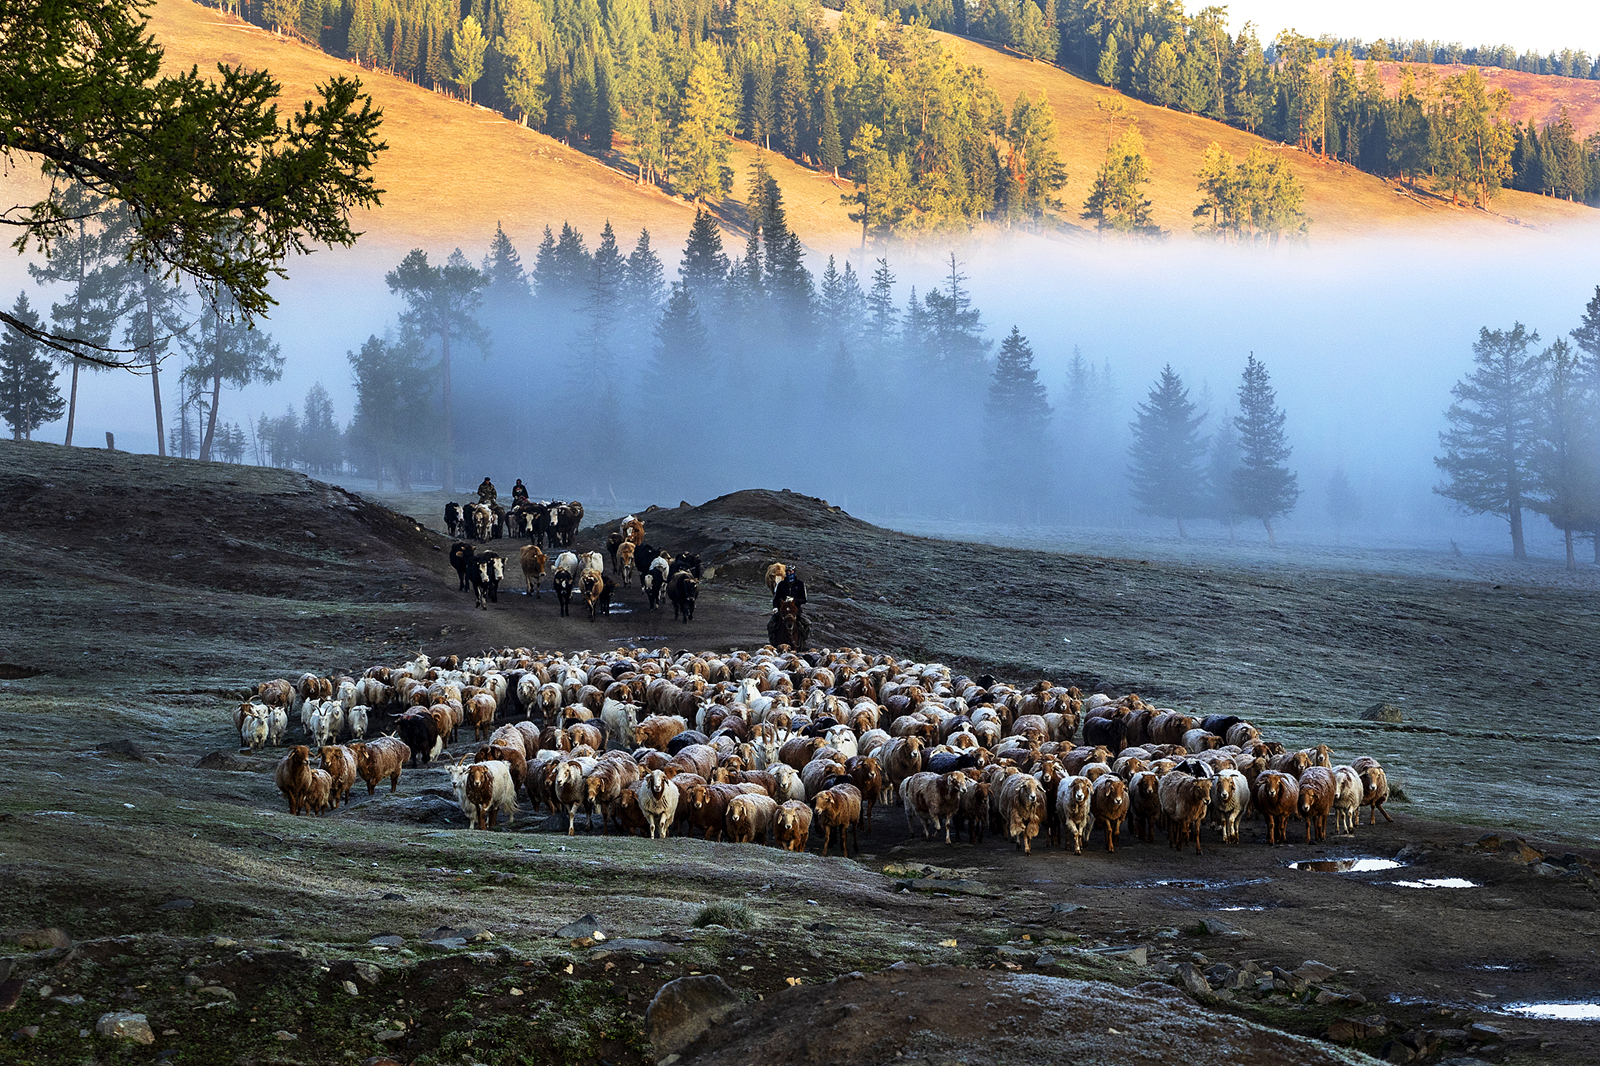 Kazakh herders, driving their cattle and sheep, migrate towards the autumn pastures as the weather turns cold in Altay, Xinjiang. /CFP